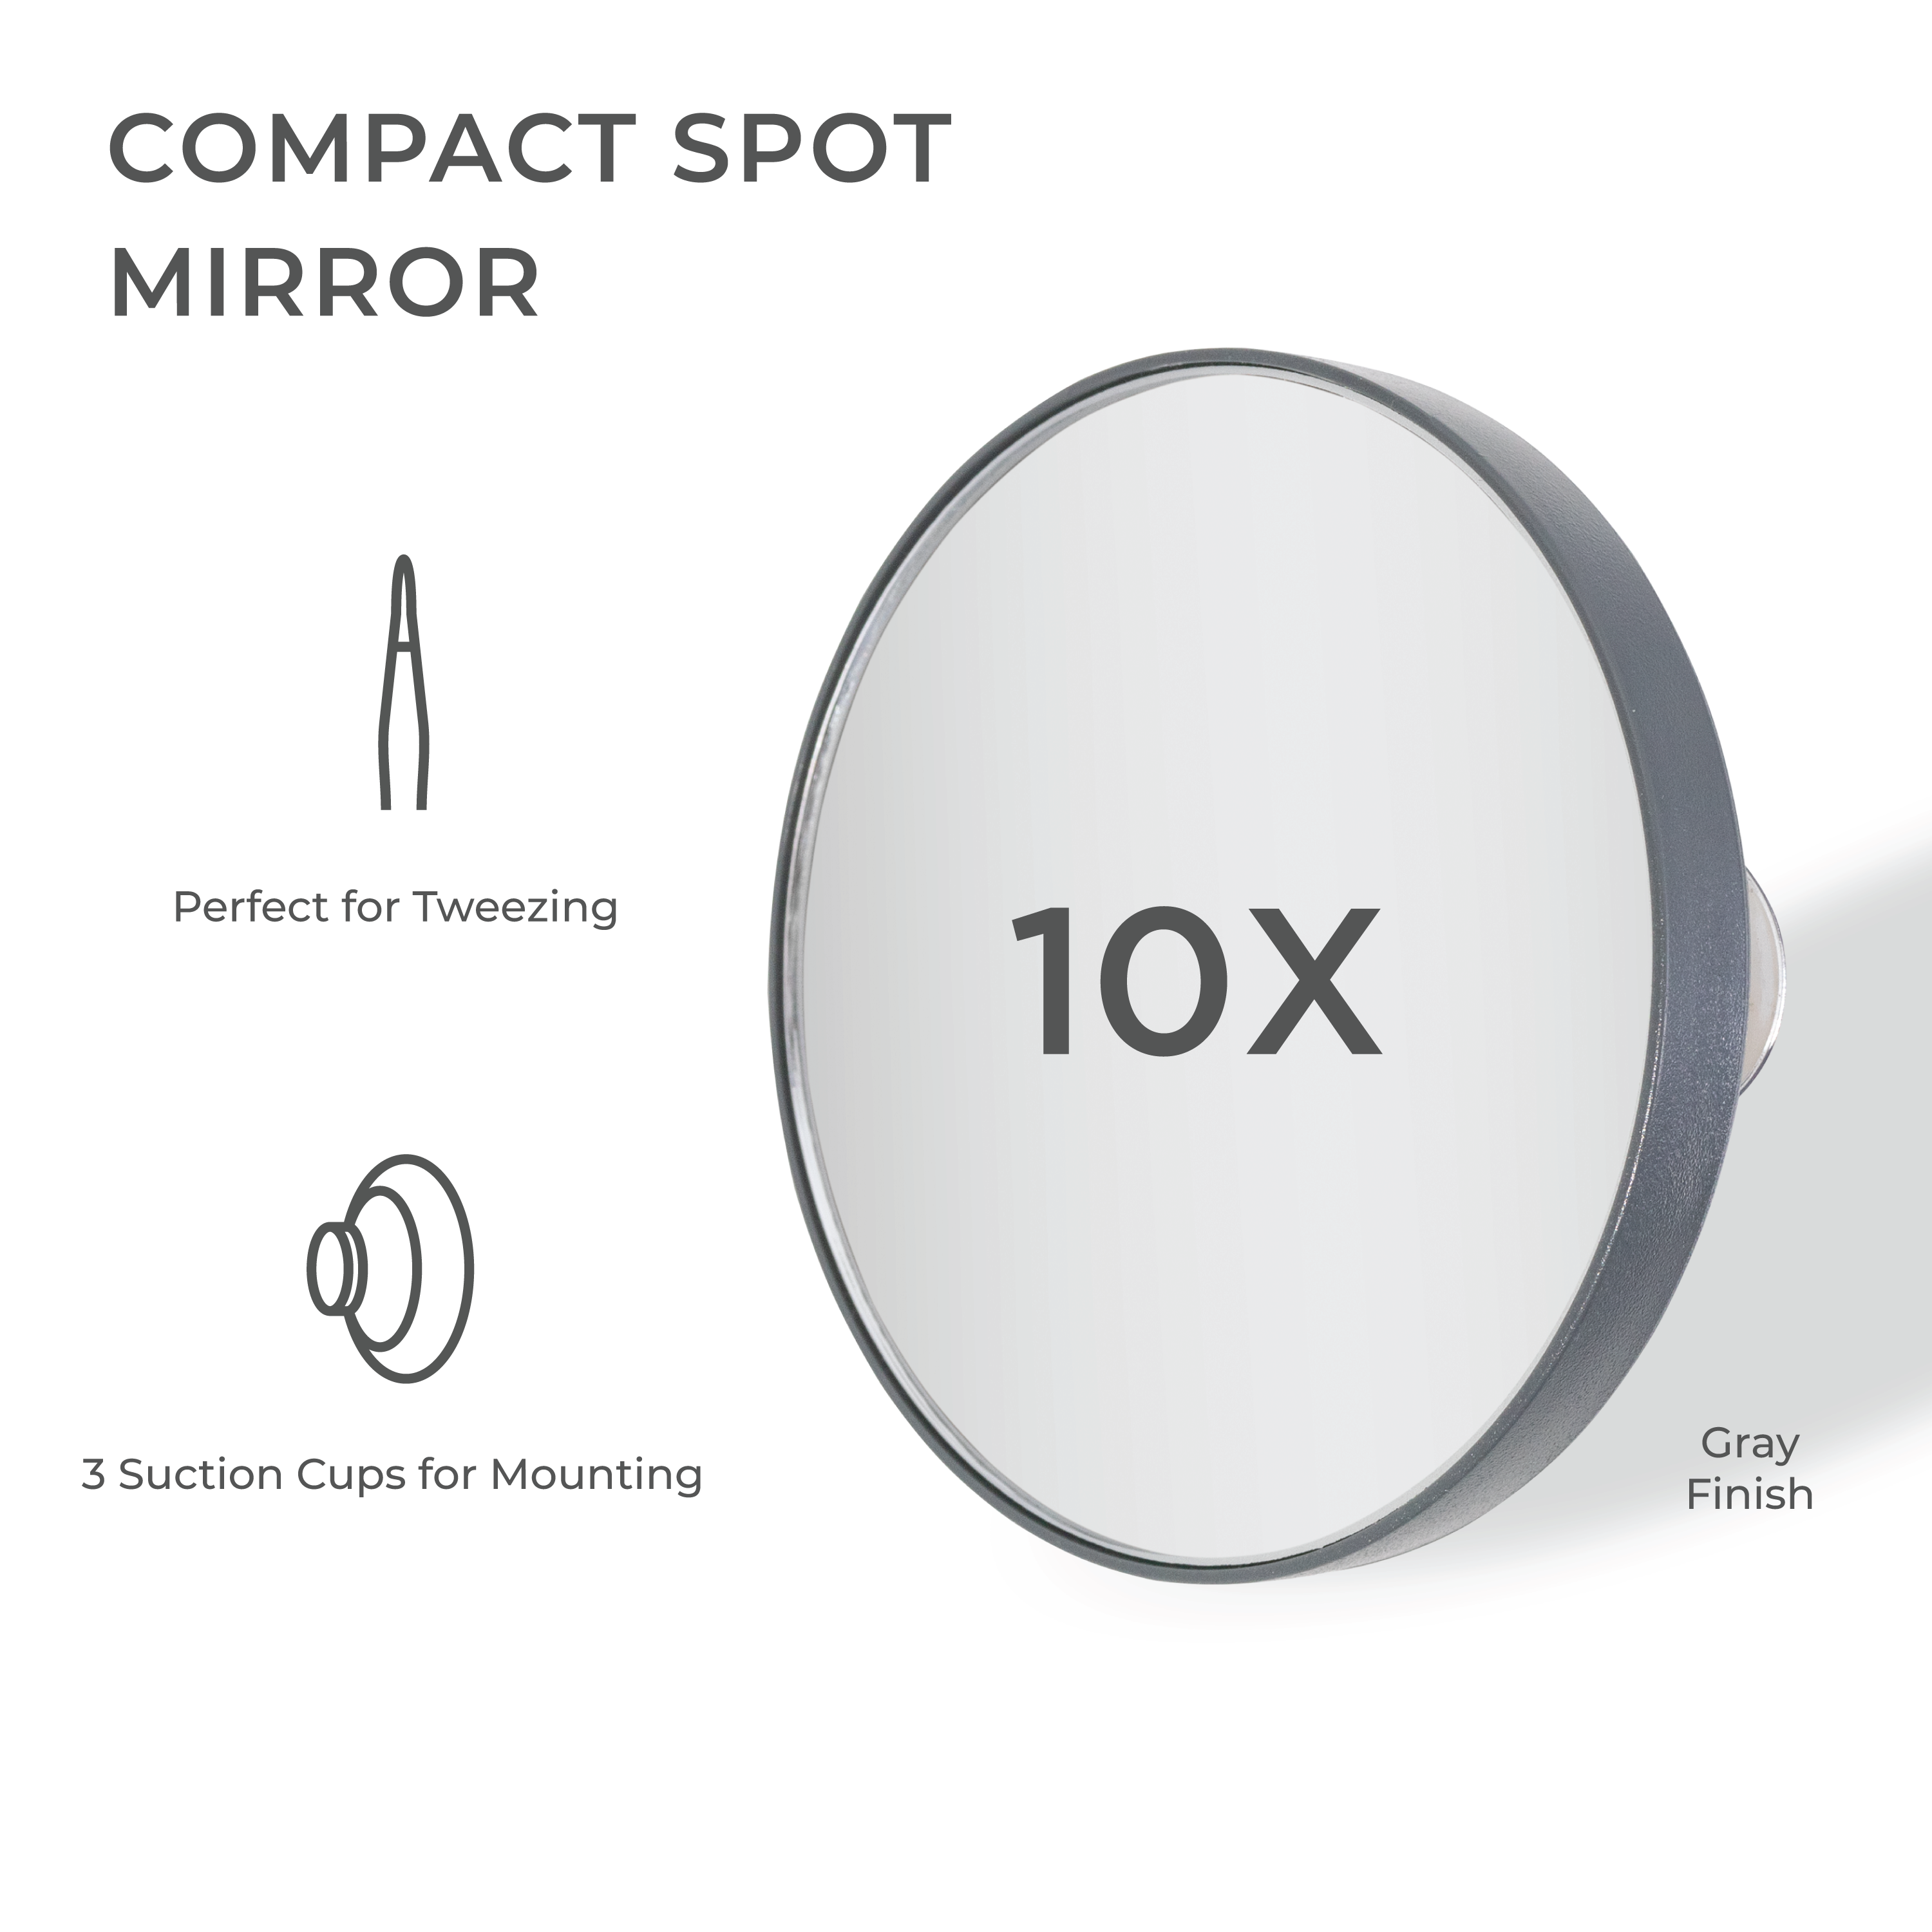 Compact Mirror with Magnification & Suction Cup